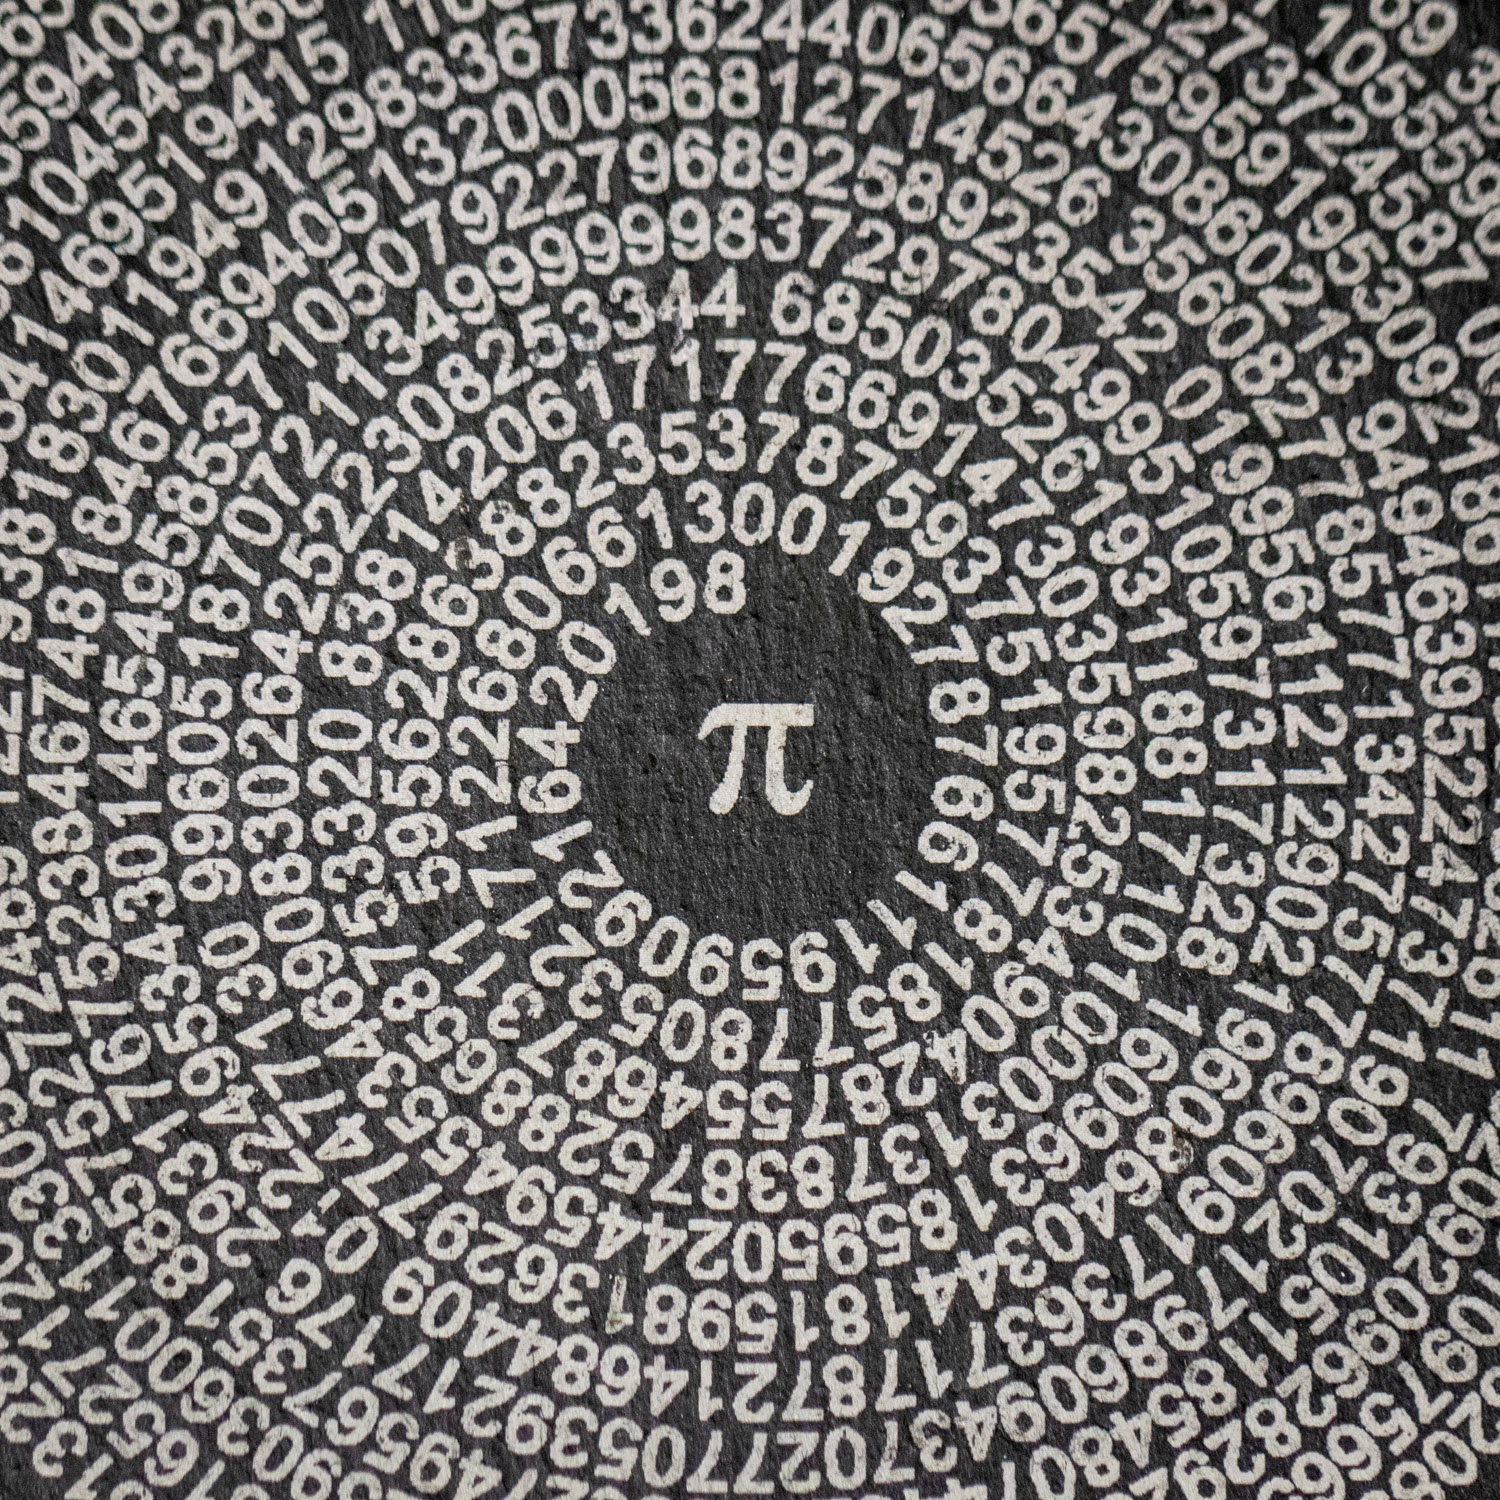 pi to 500 decimal places on a coaster great unusual maths geek memory gift 